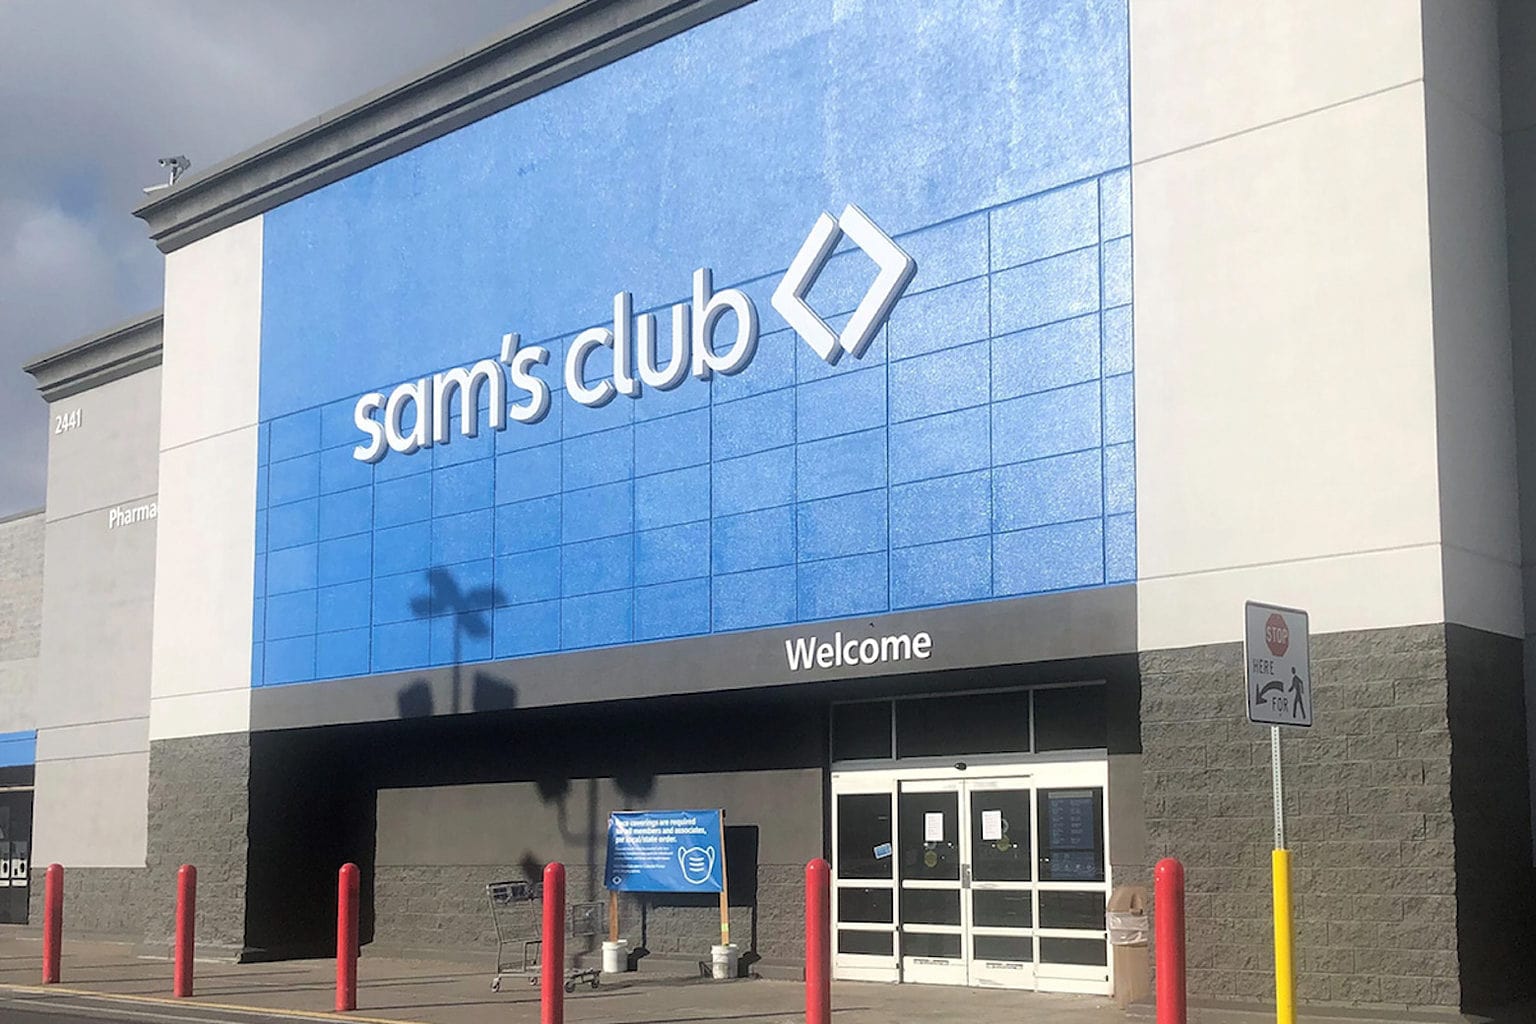 This Sam's Club Plus membership is an awesome last-minute gift with no shipping time.